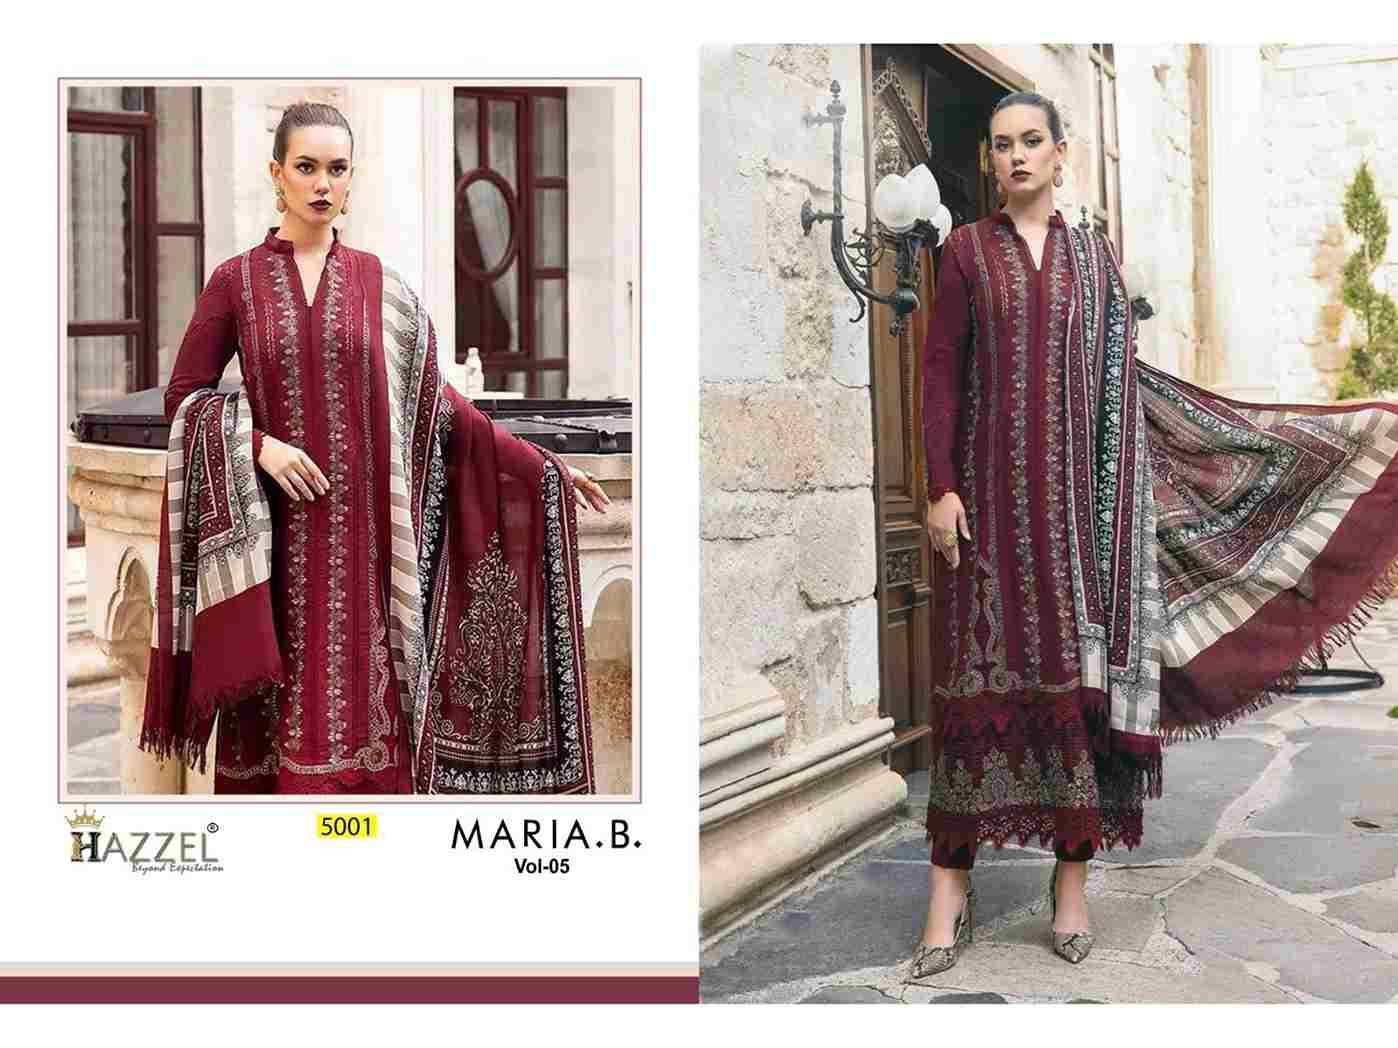 Maria.B. Vol-5 By Hazzel 5001 To 5003 Series Pakistani Suits Beautiful Fancy Colorful Stylish Party Wear & Occasional Wear Rayon Cotton With Embroidery Dresses At Wholesale Price